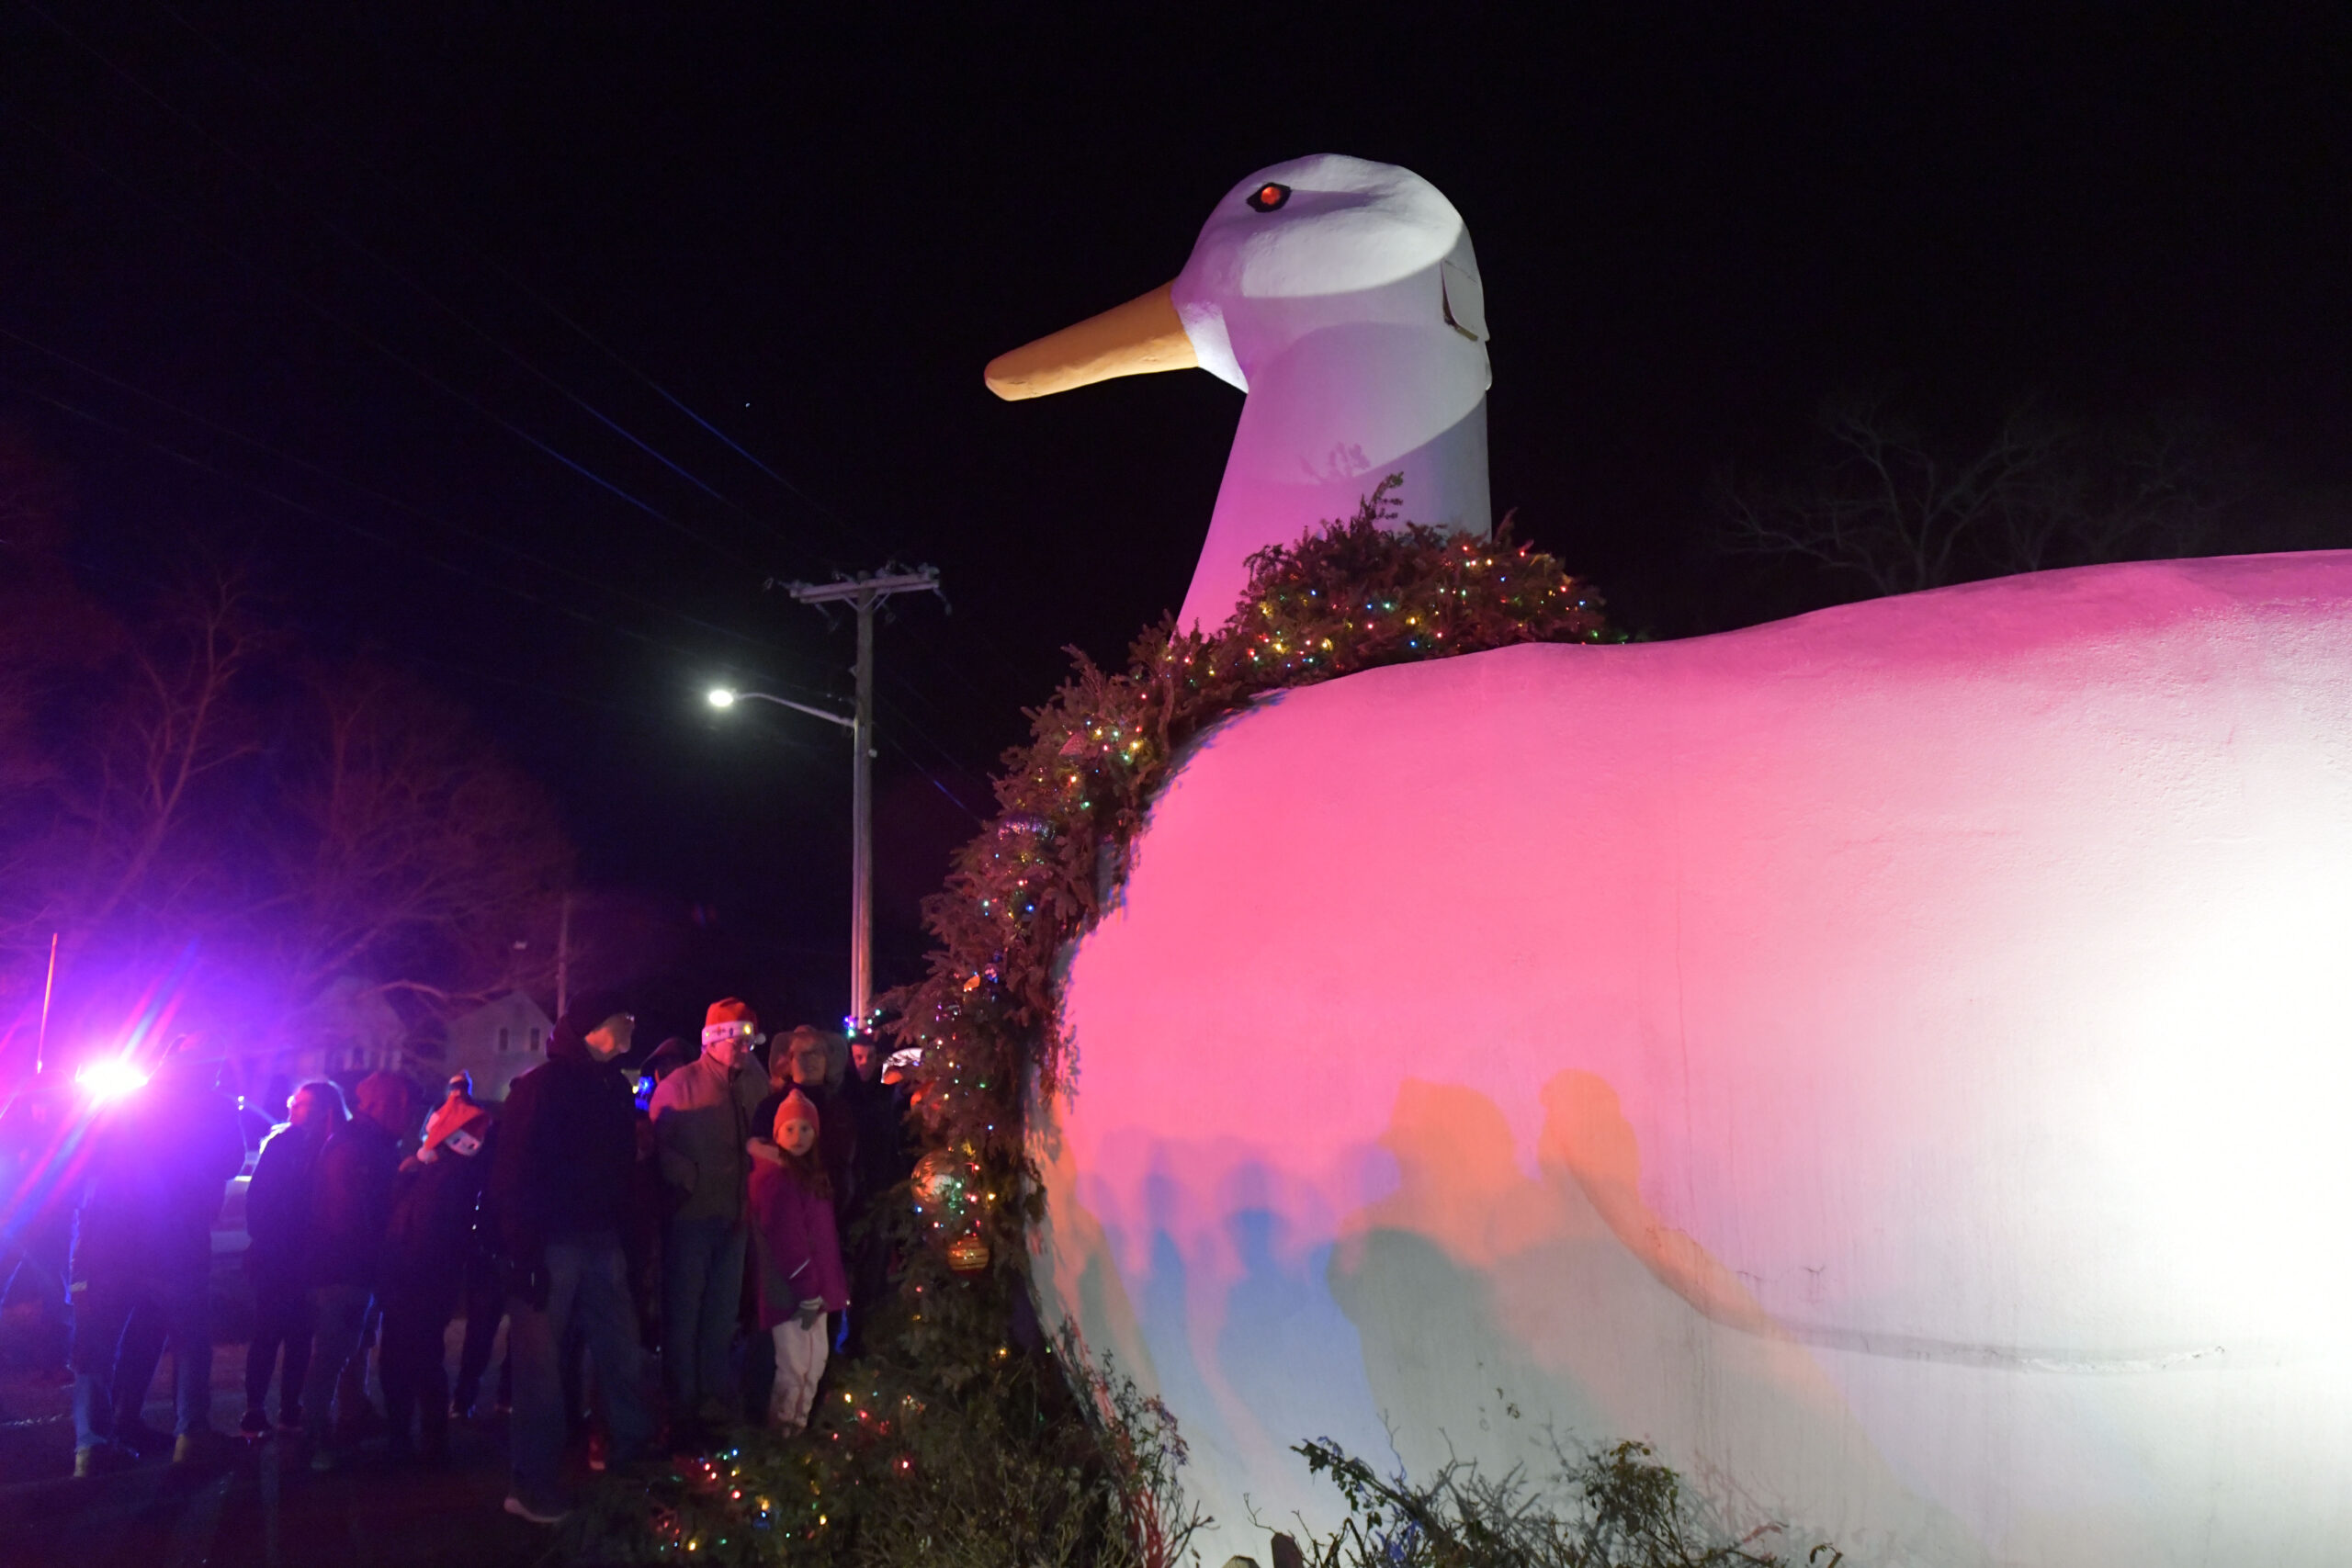 The duck is lighted.